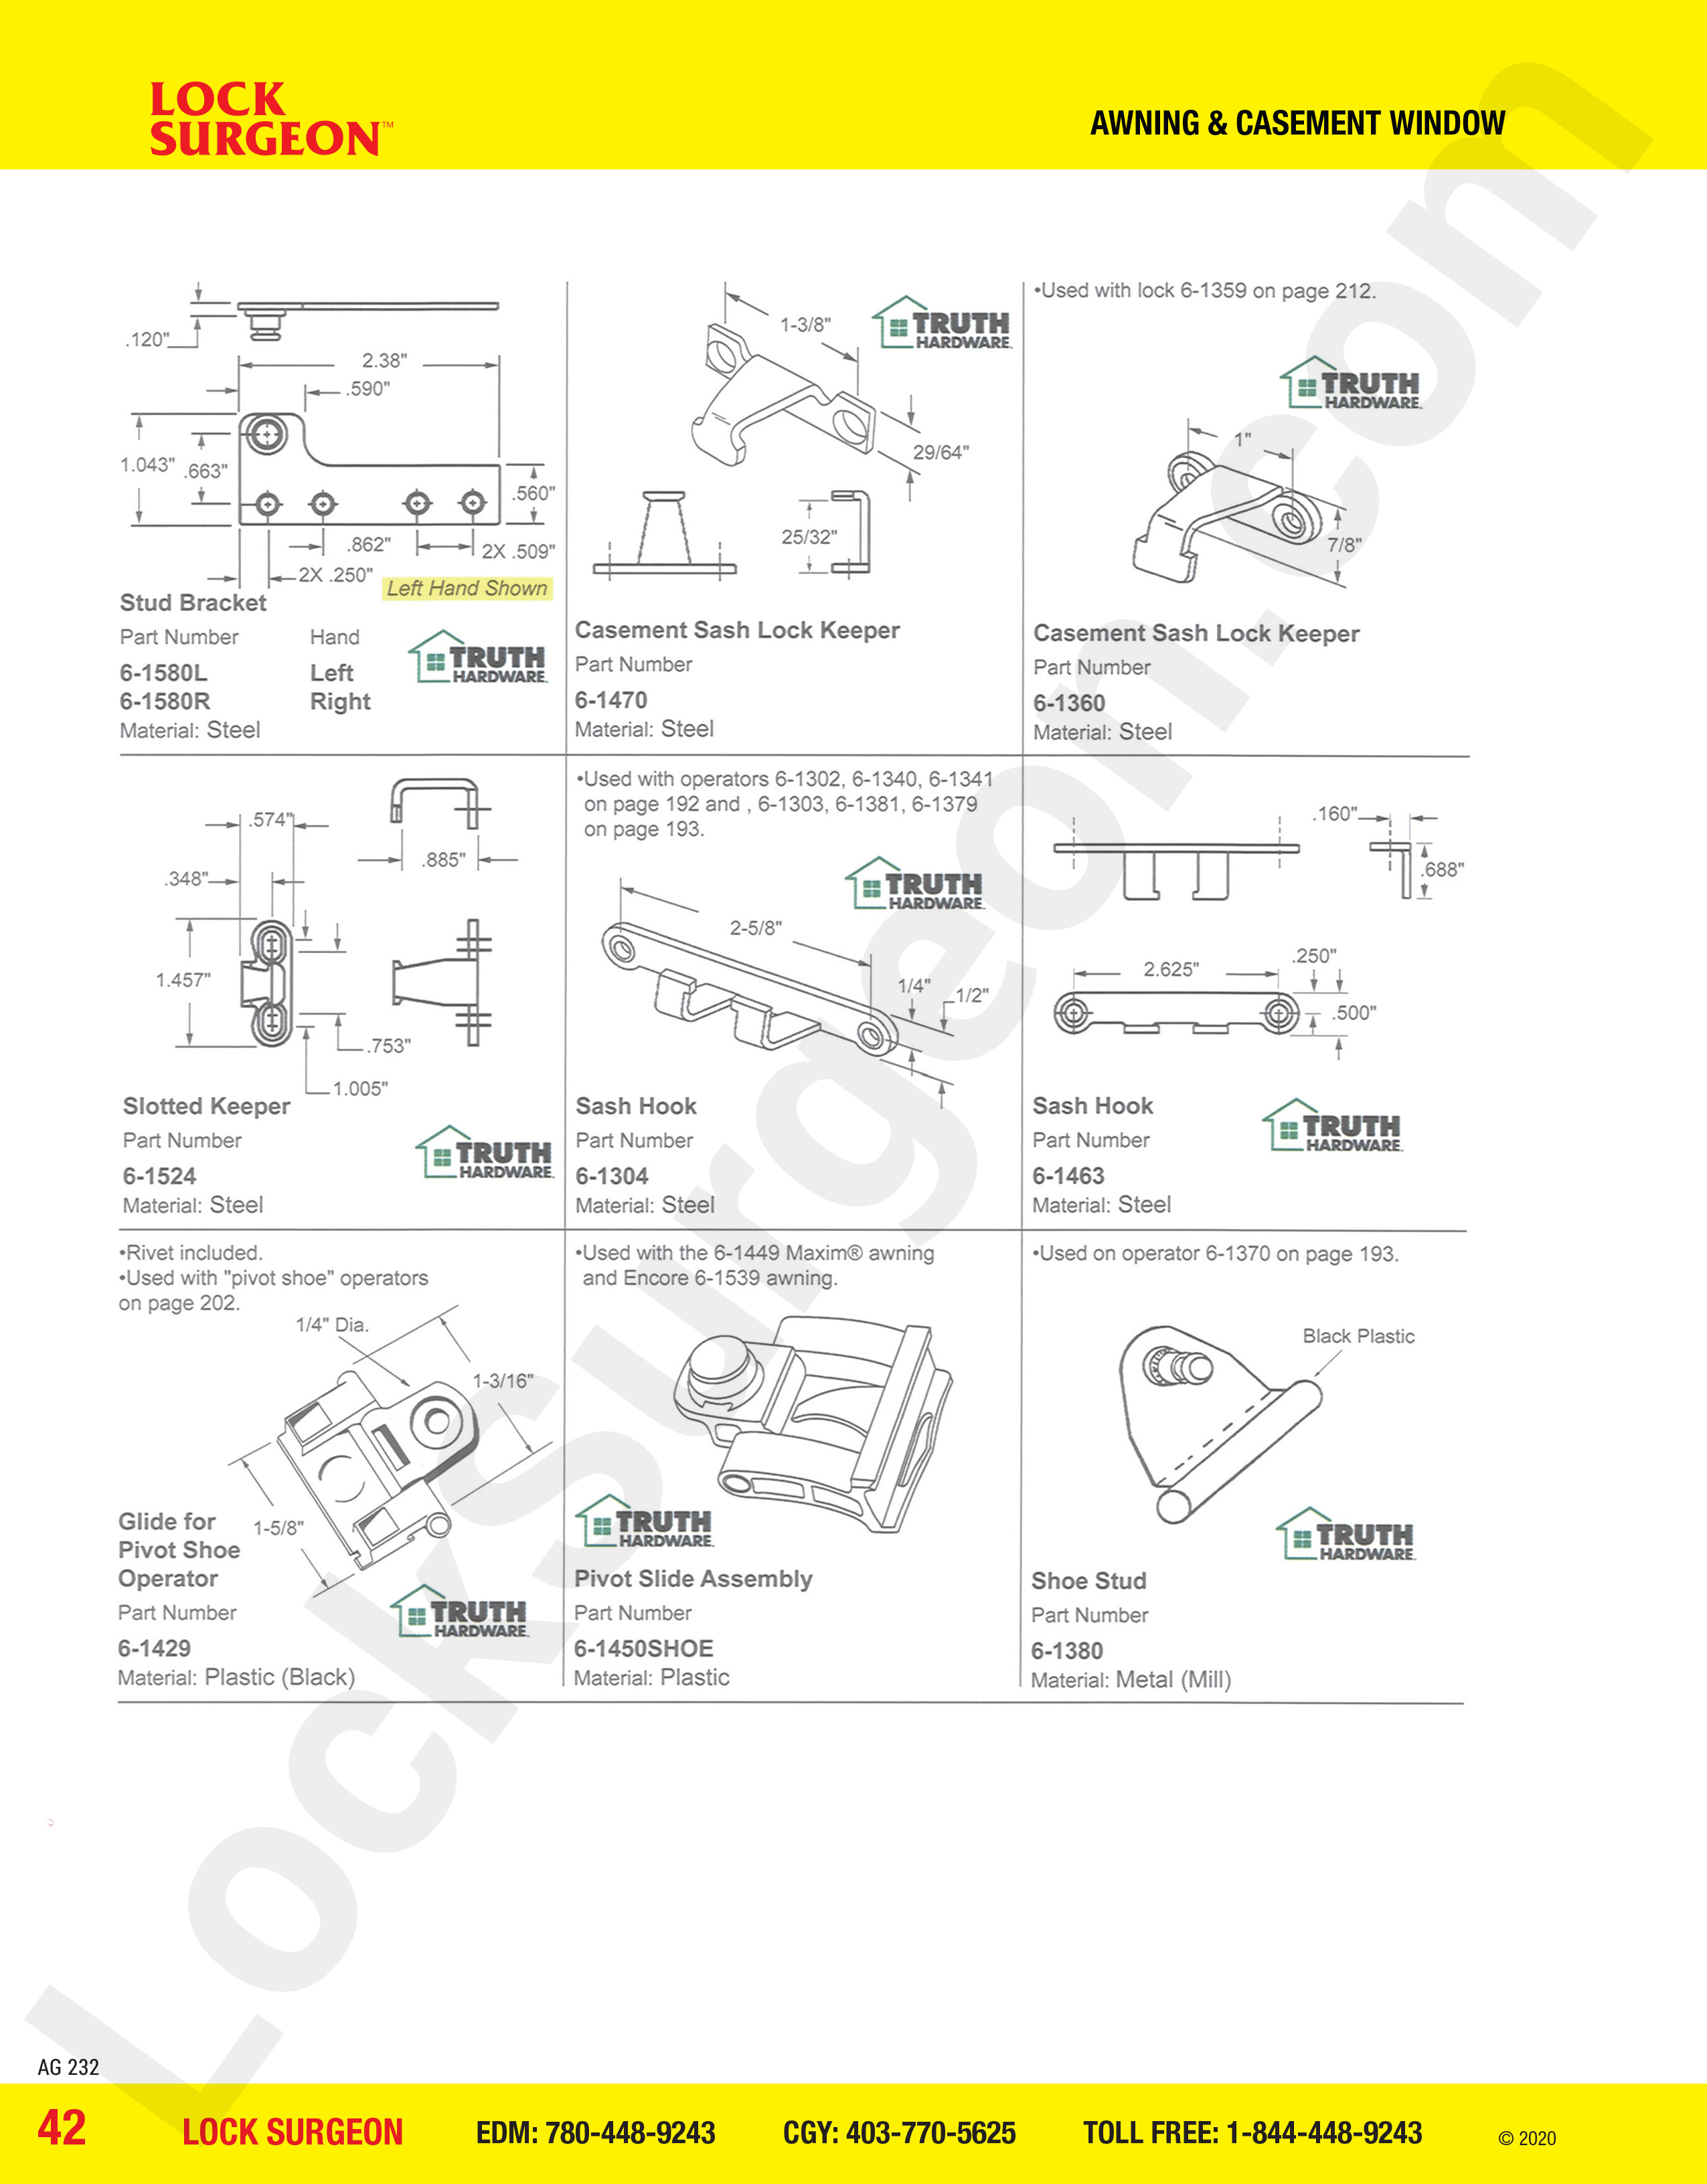 awning and casement window parts for truth hardware keepers